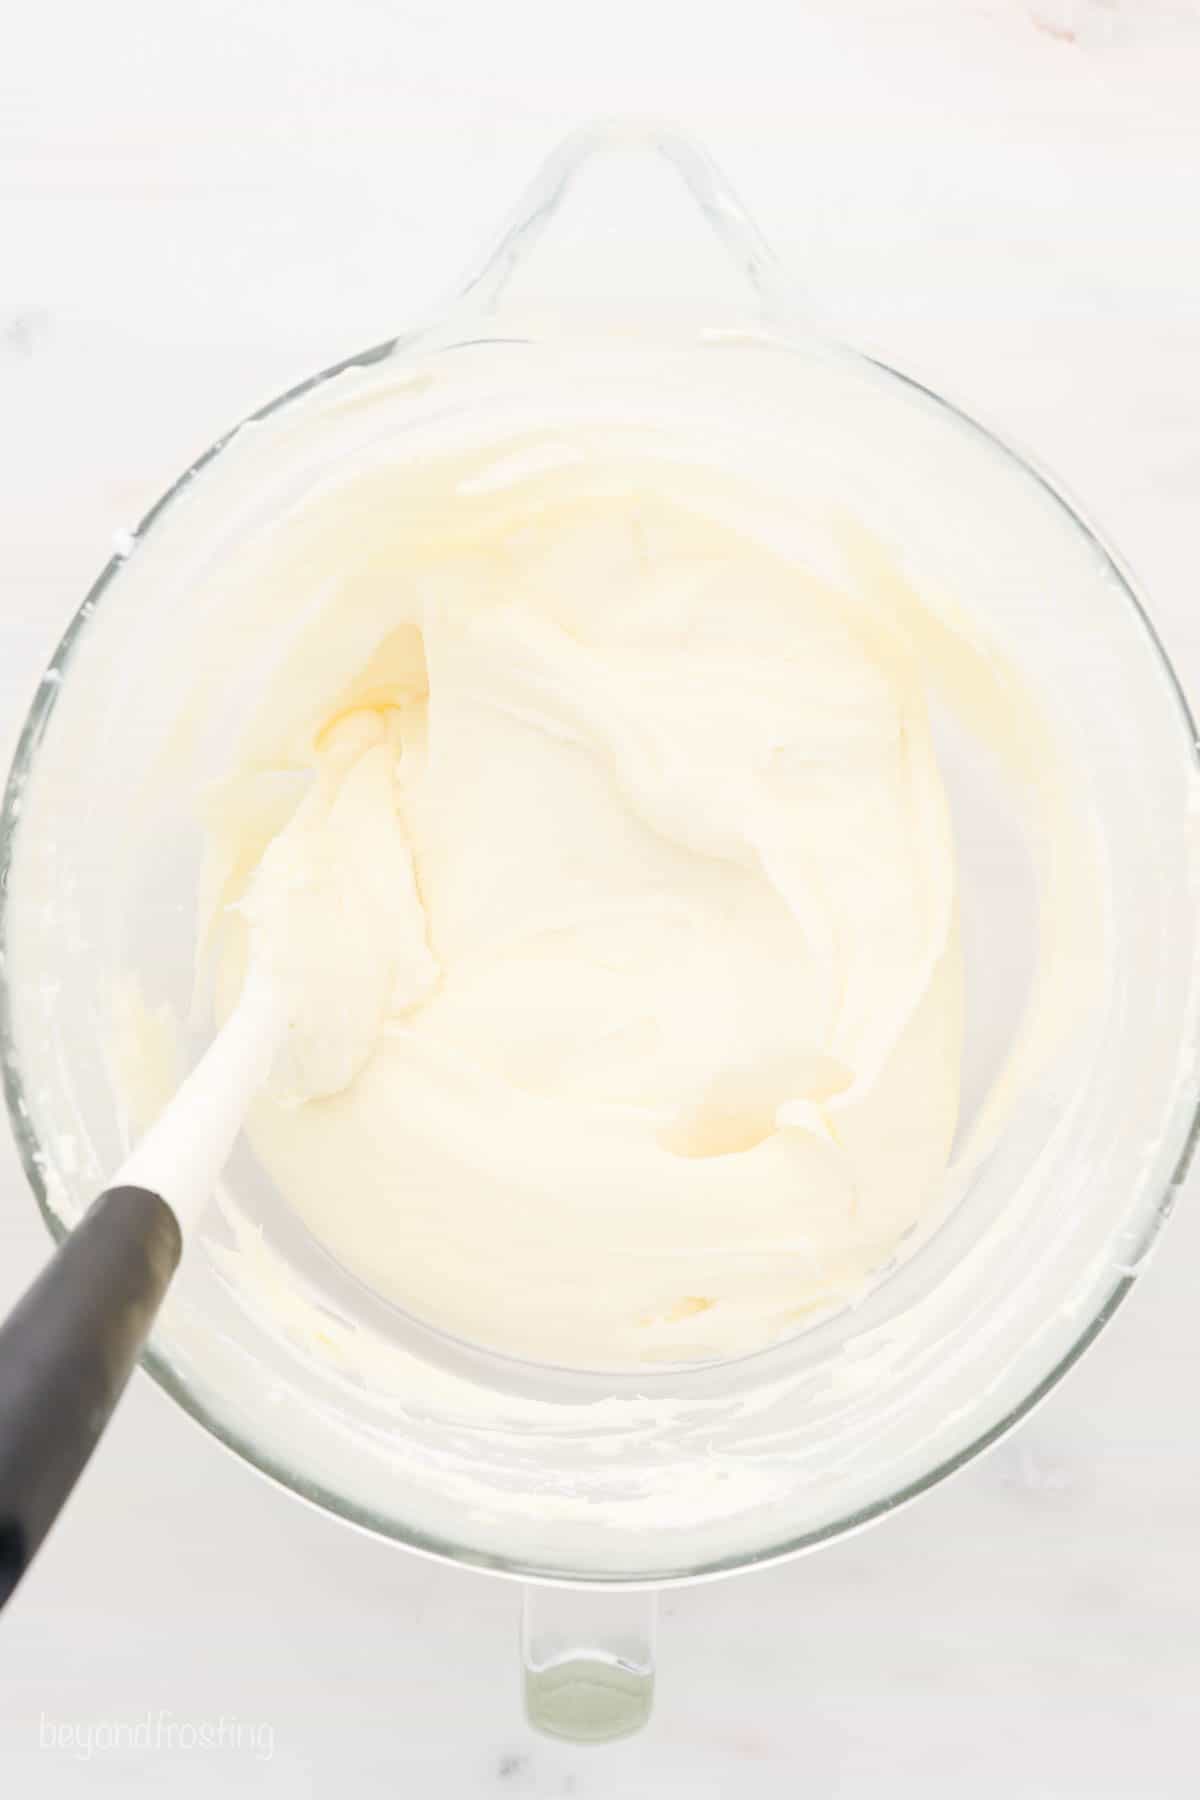 A mixing bowl with cream cheese frosting and a white spatula